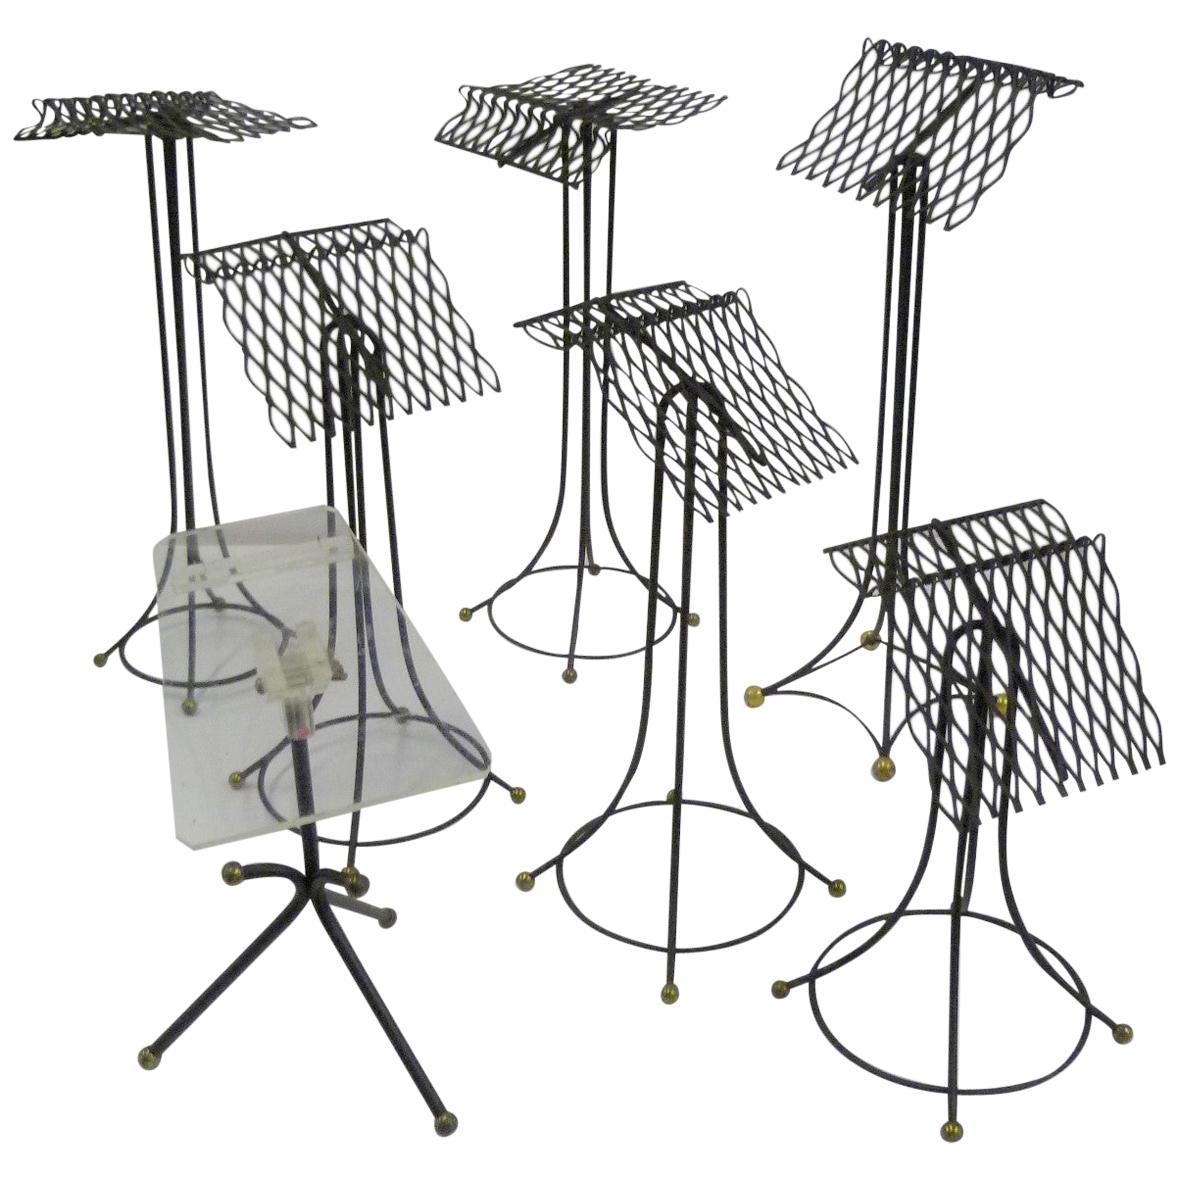 Sculptural Group of 7 Modern Black Wire Store Display Stands, 1930s-1940s